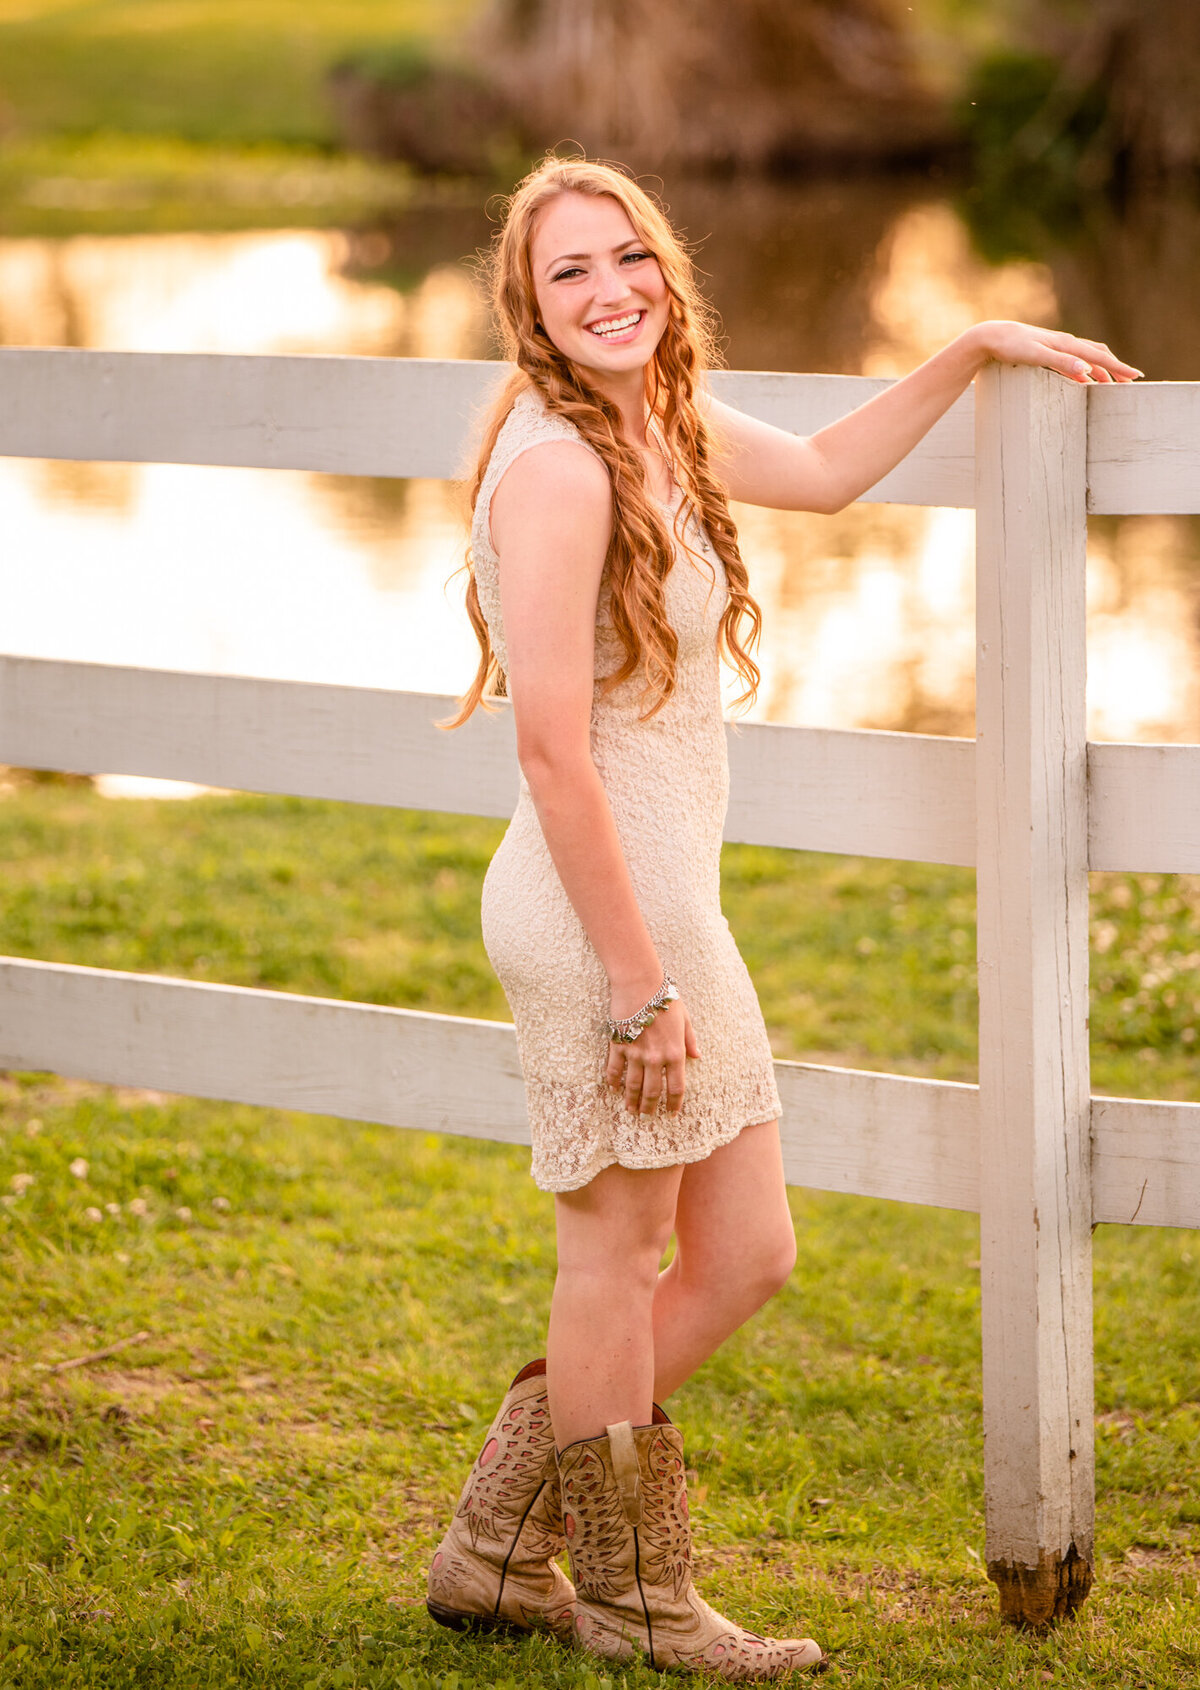 A senior wearing a white dress and cowboy boots stands next to a white fence and smiles at the camera.